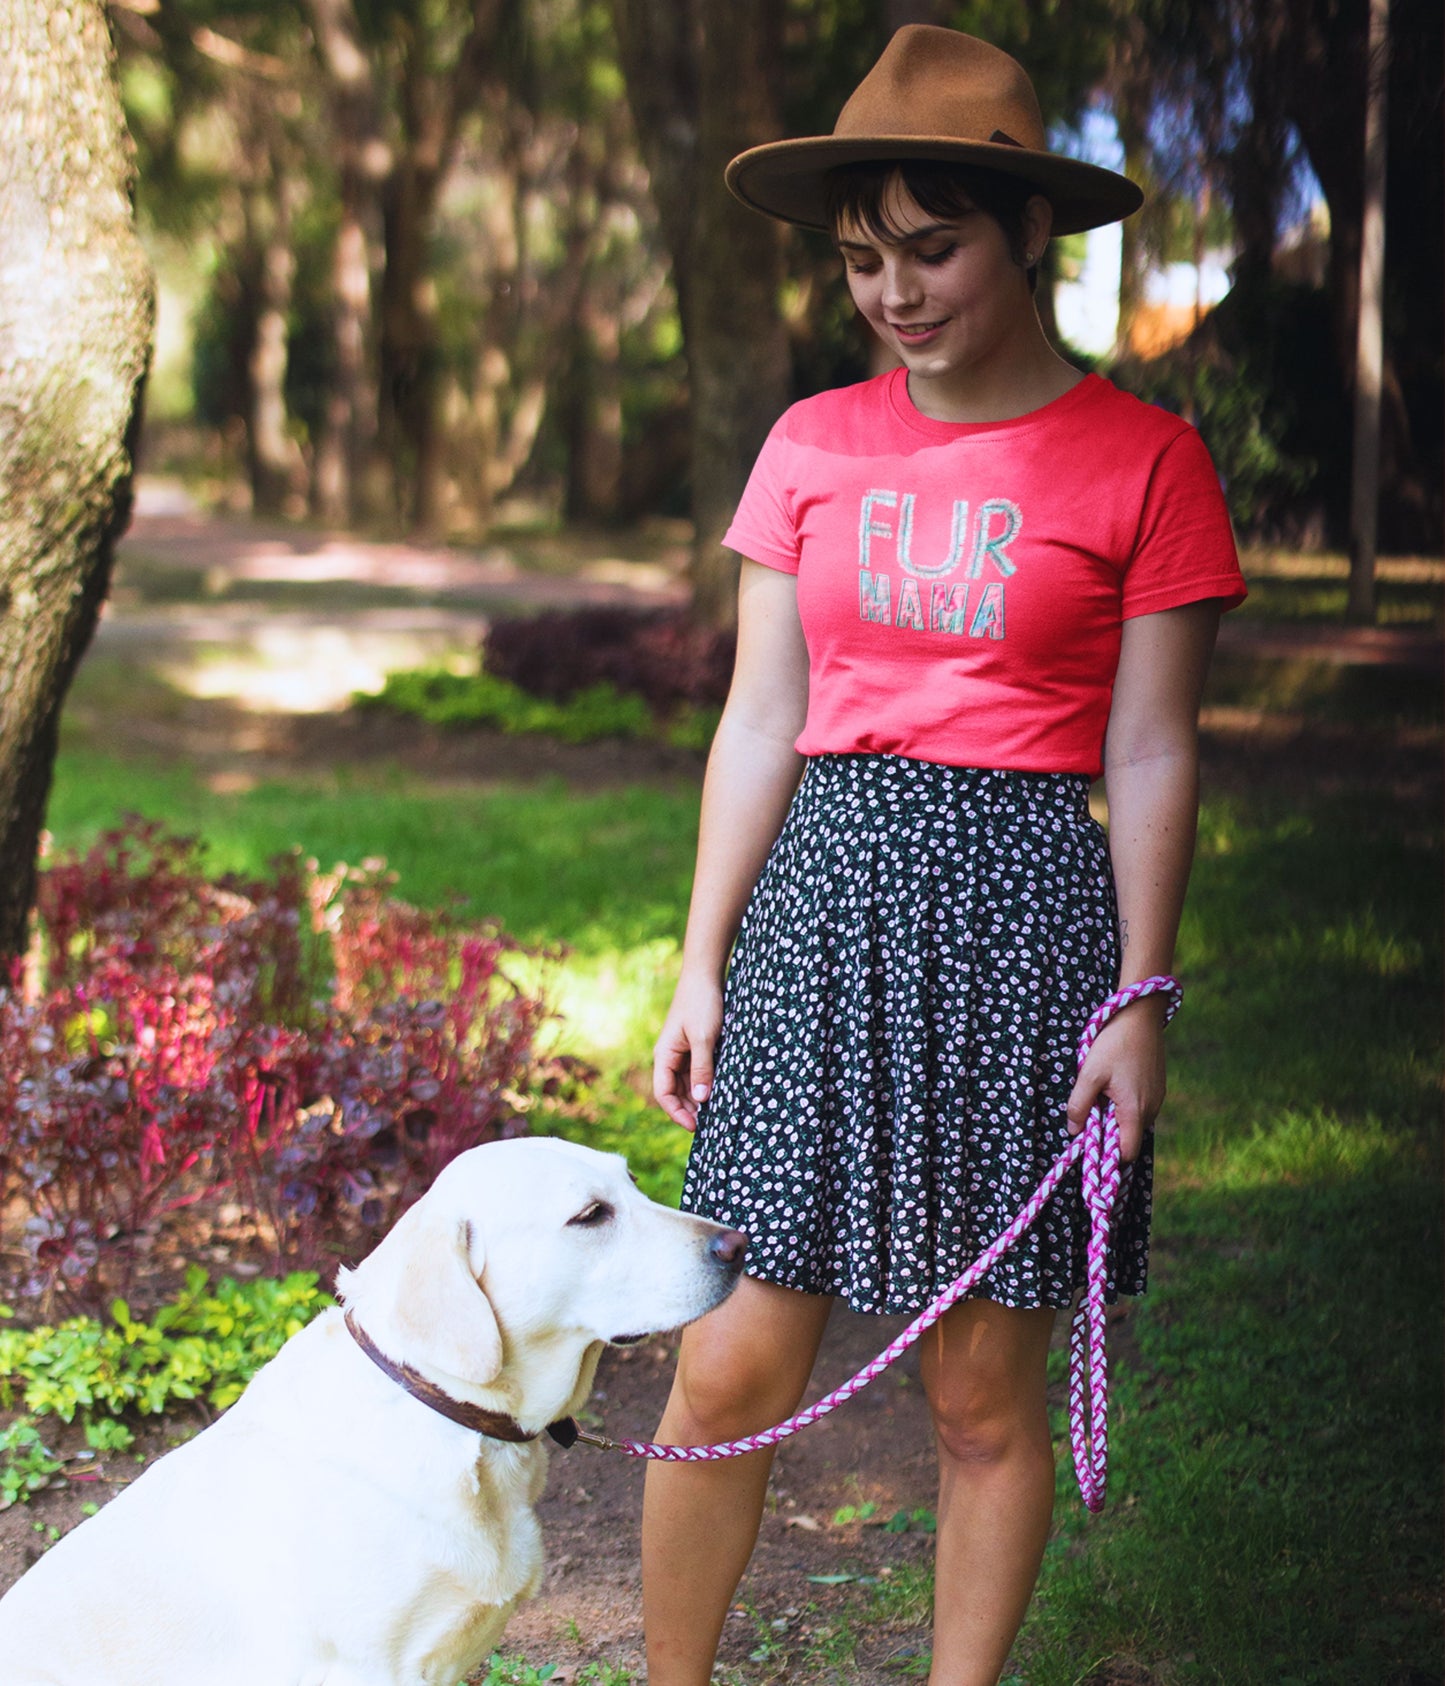 FUR MAMA Fringed embroidery Pink Tshirt